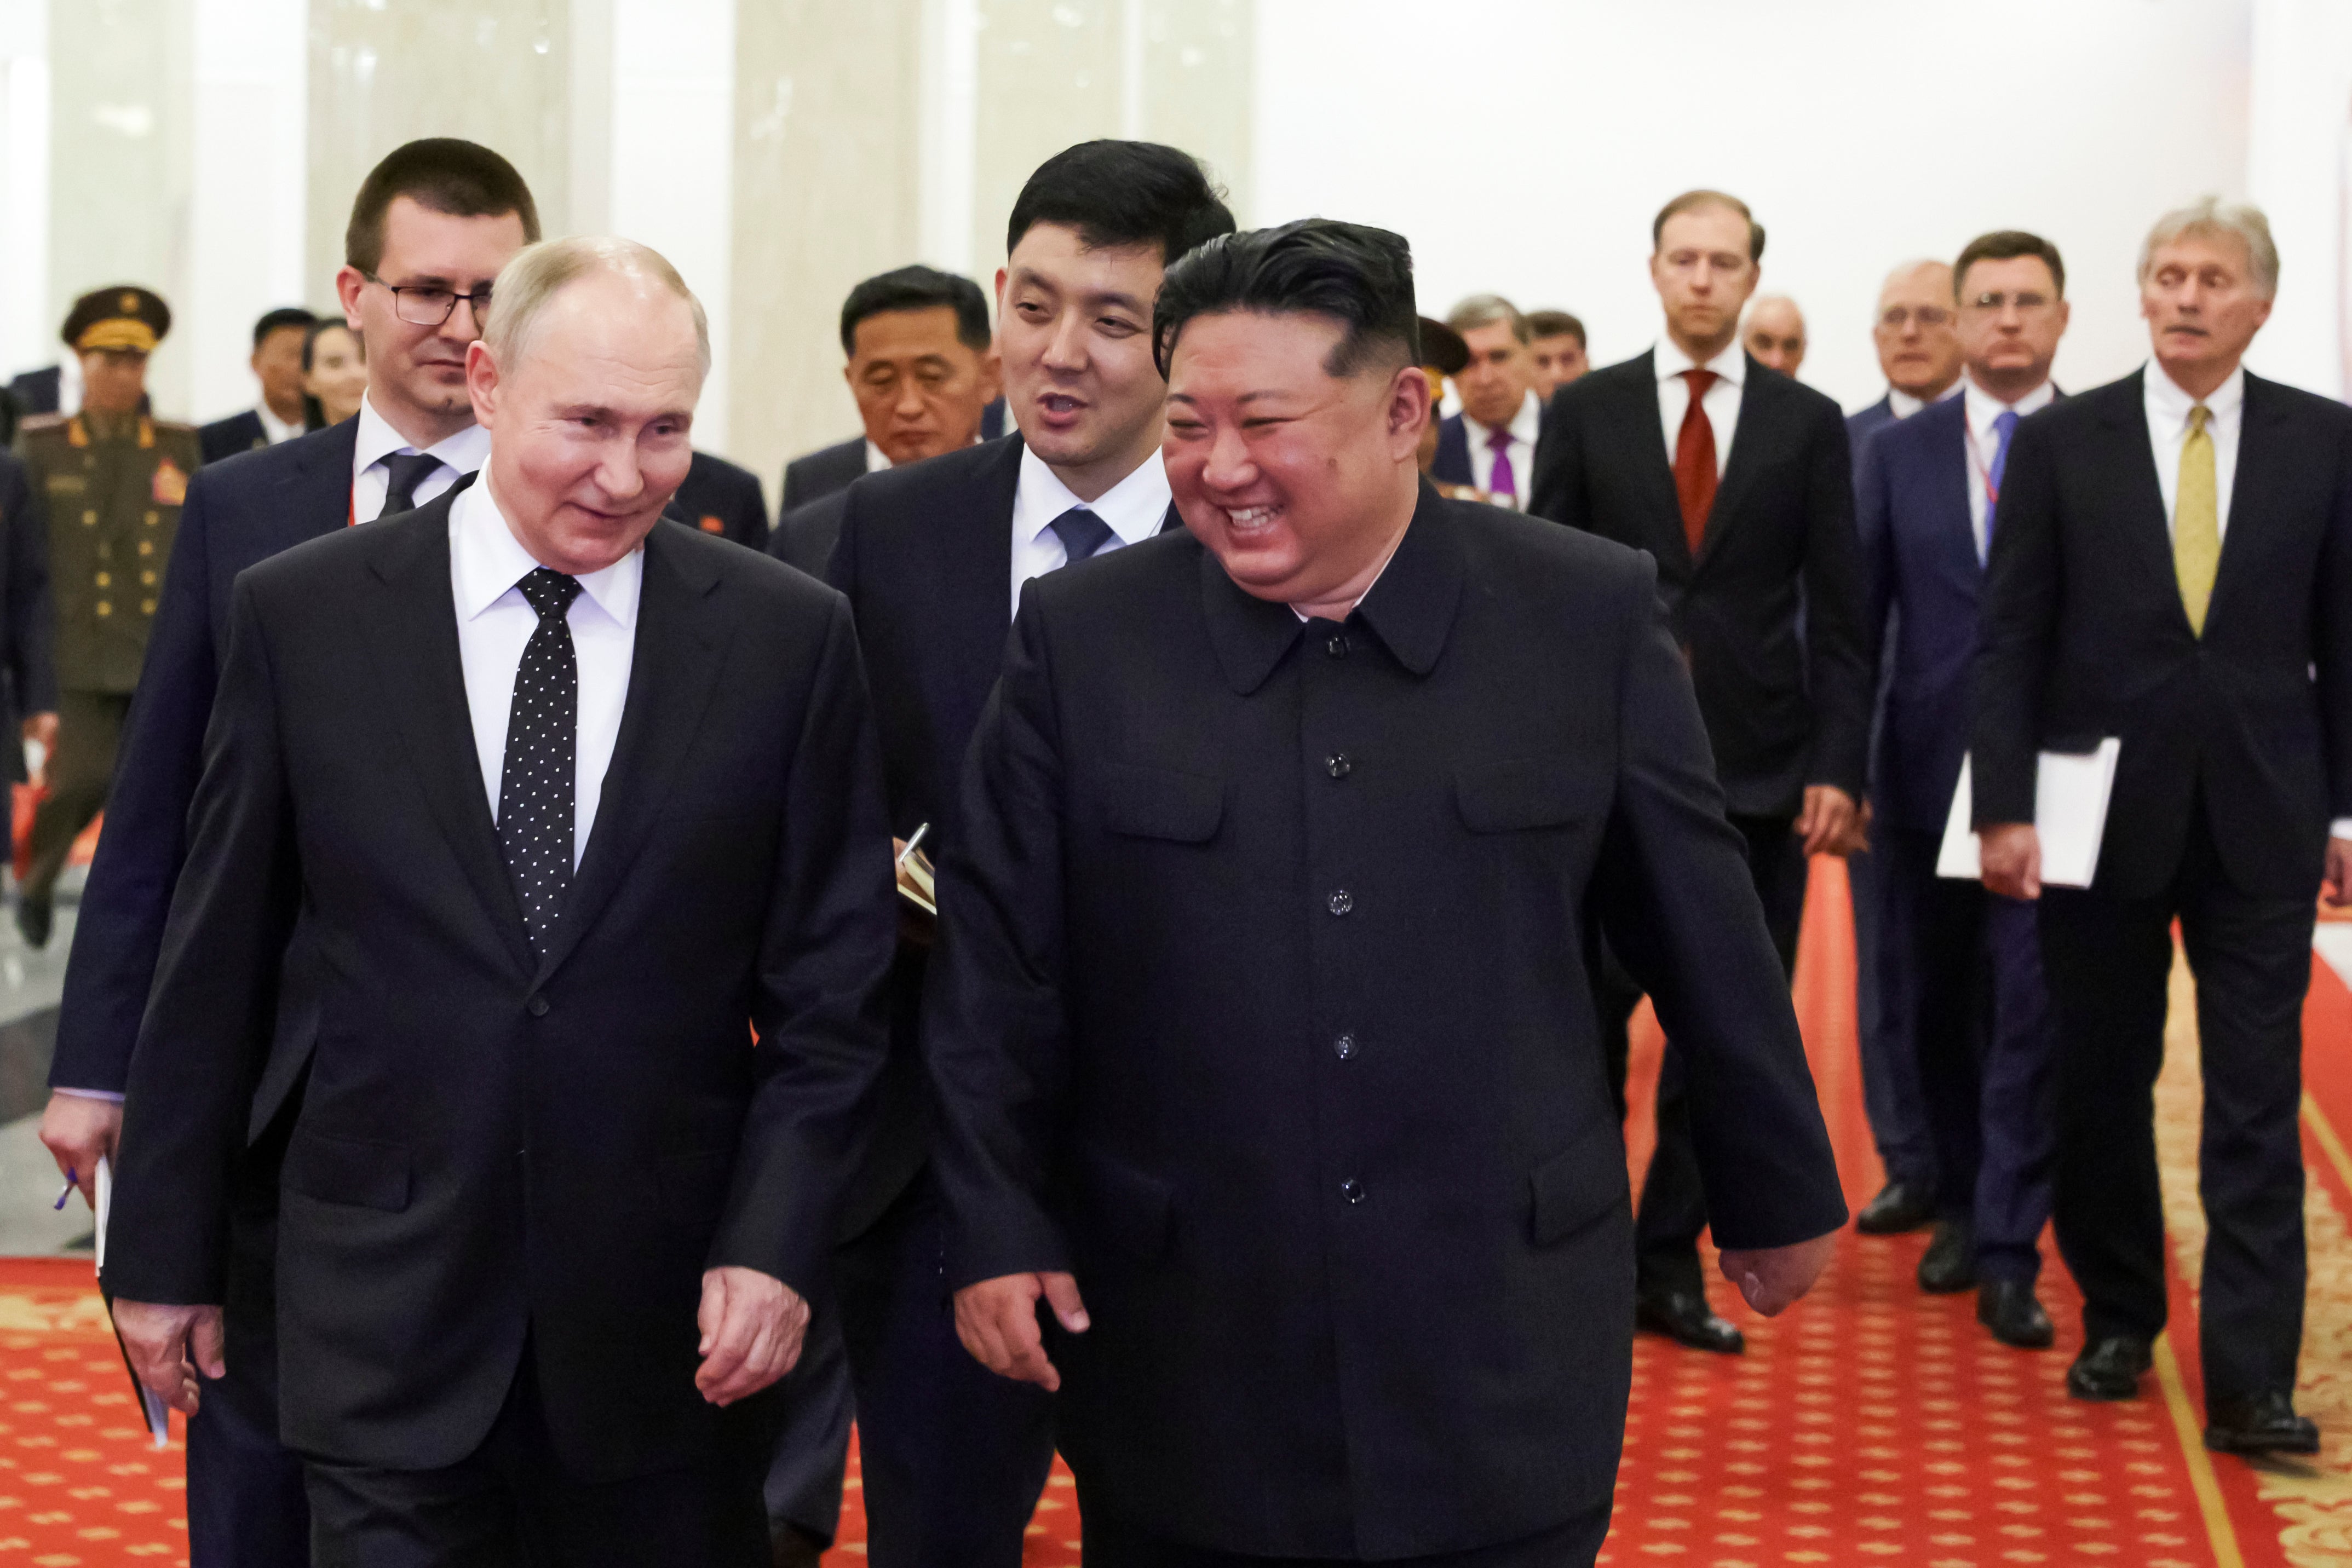 Putin and Kim Jong-un talk to each other as they walk after a signing ceremony in Pyongyang, North Korea